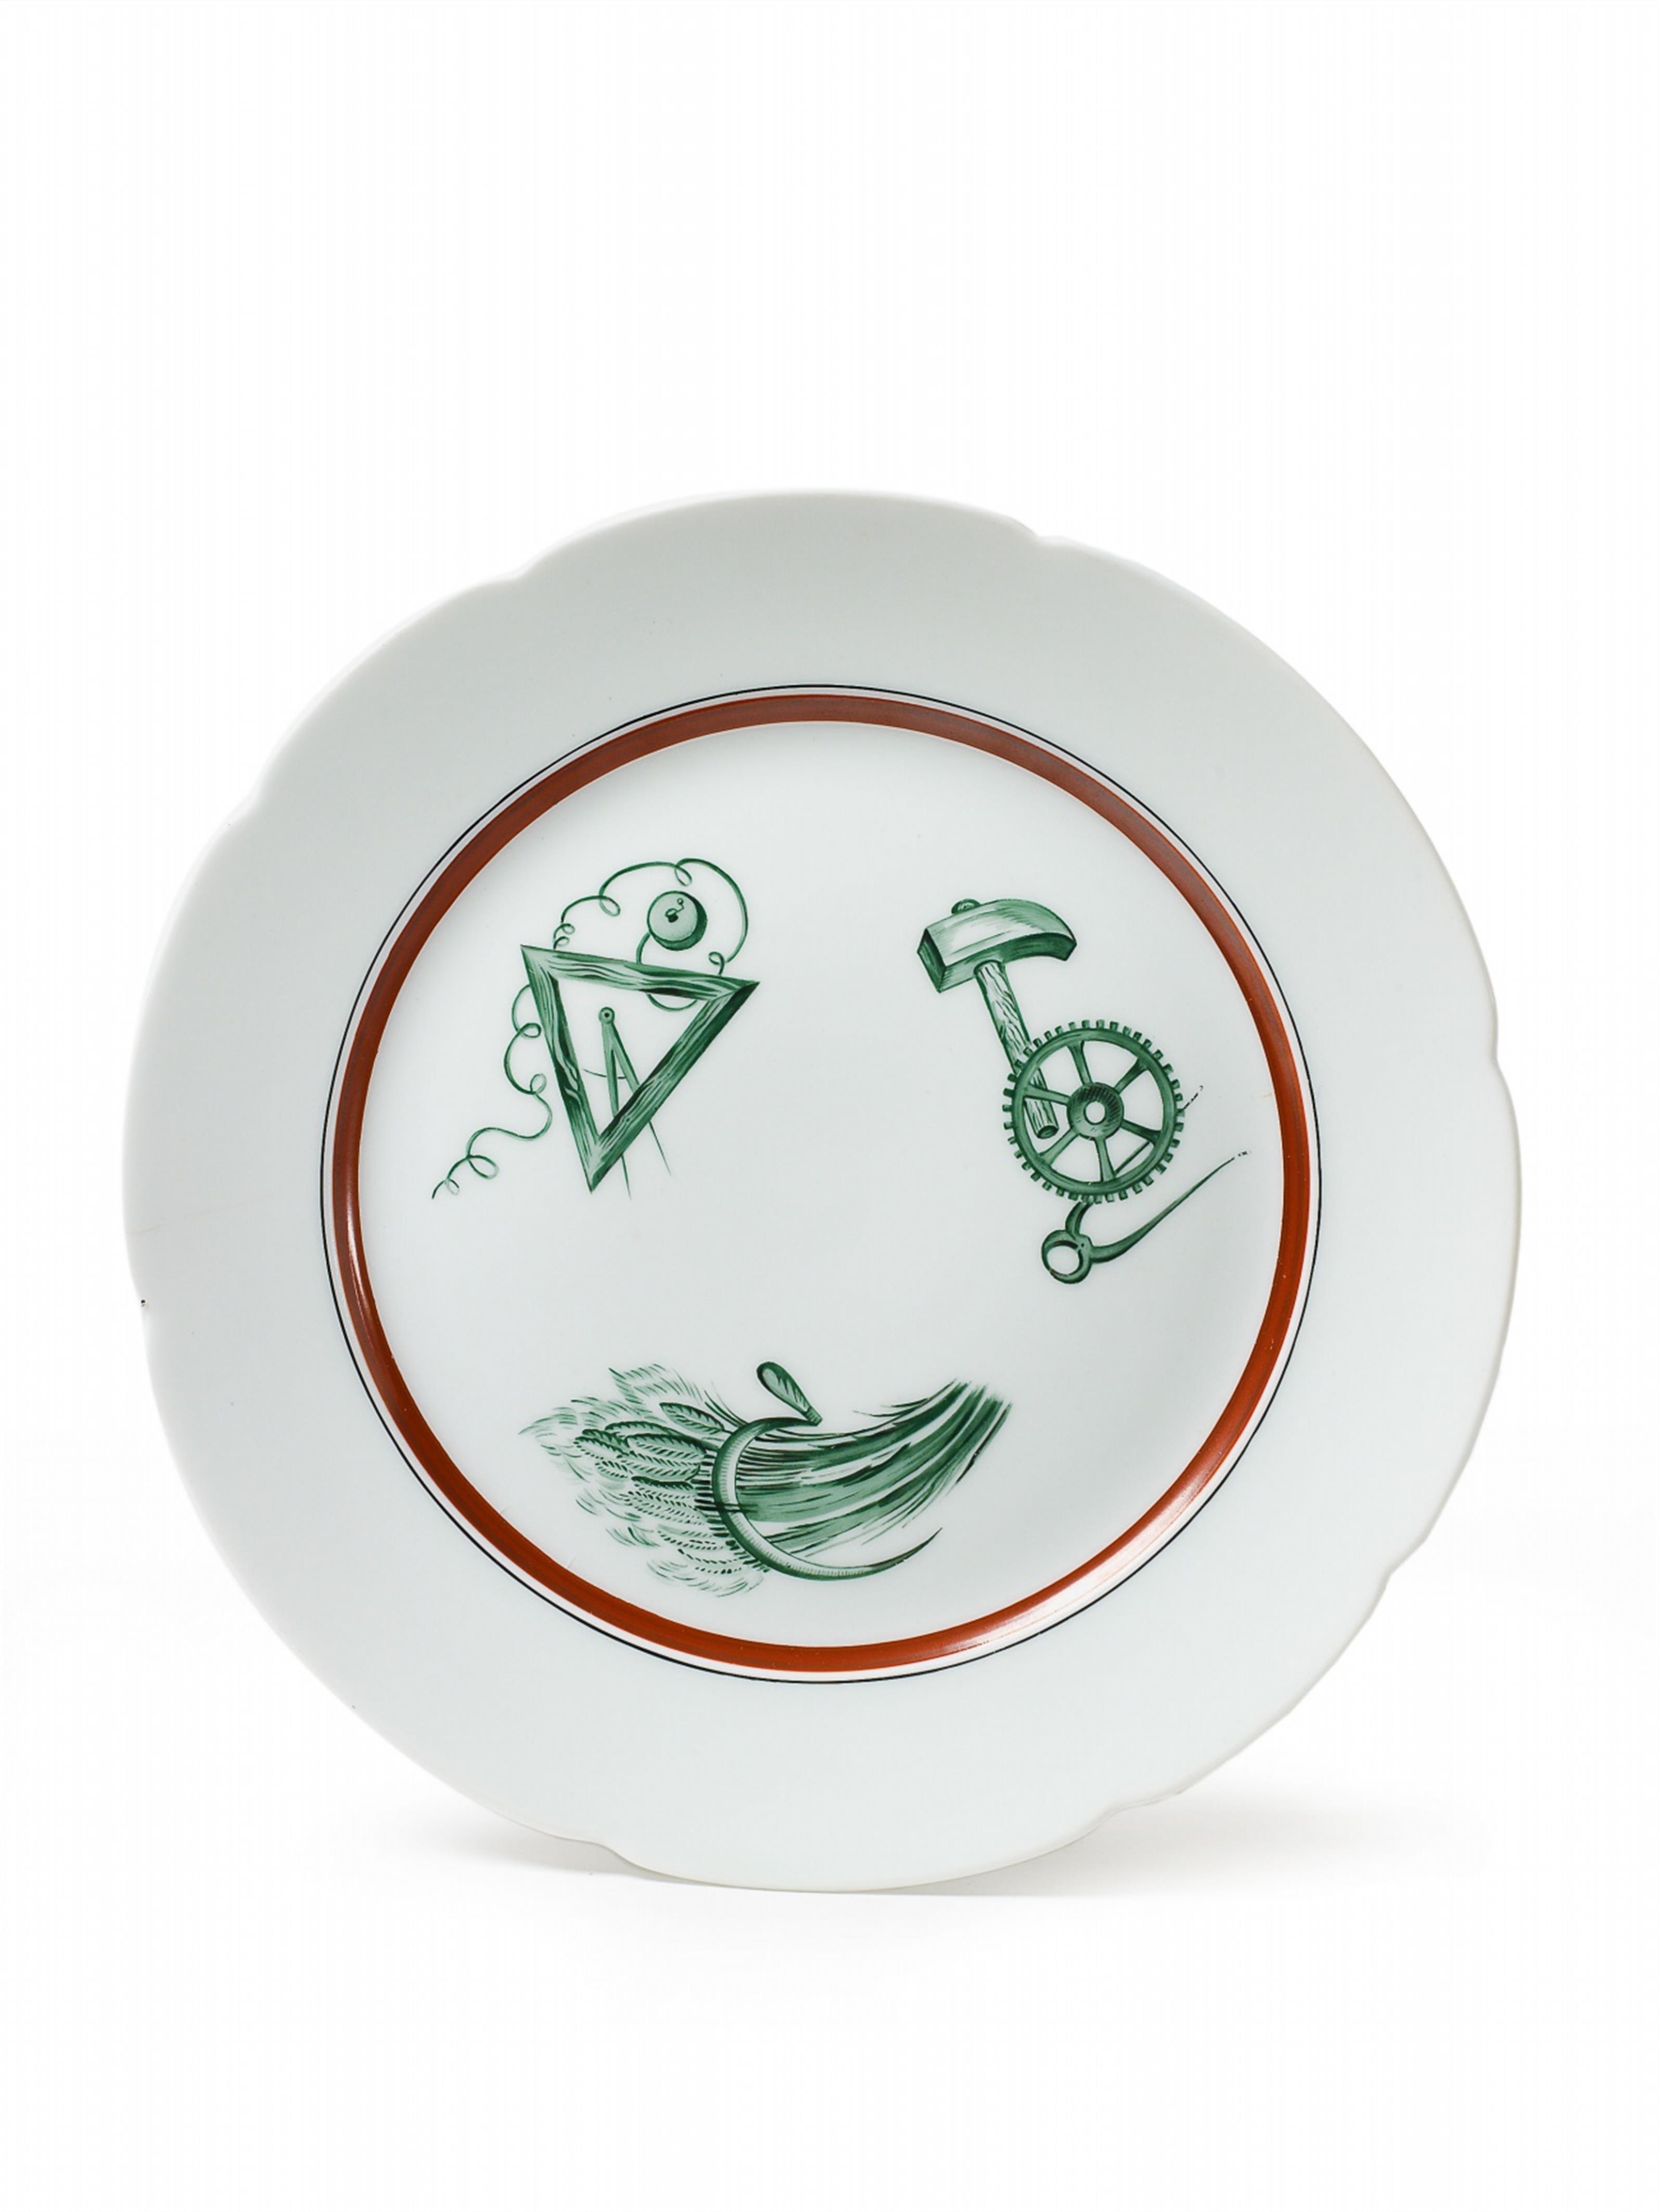 A shaped plate decorated in enamels with Soviet symbols representing various spheres of industry. - image-1